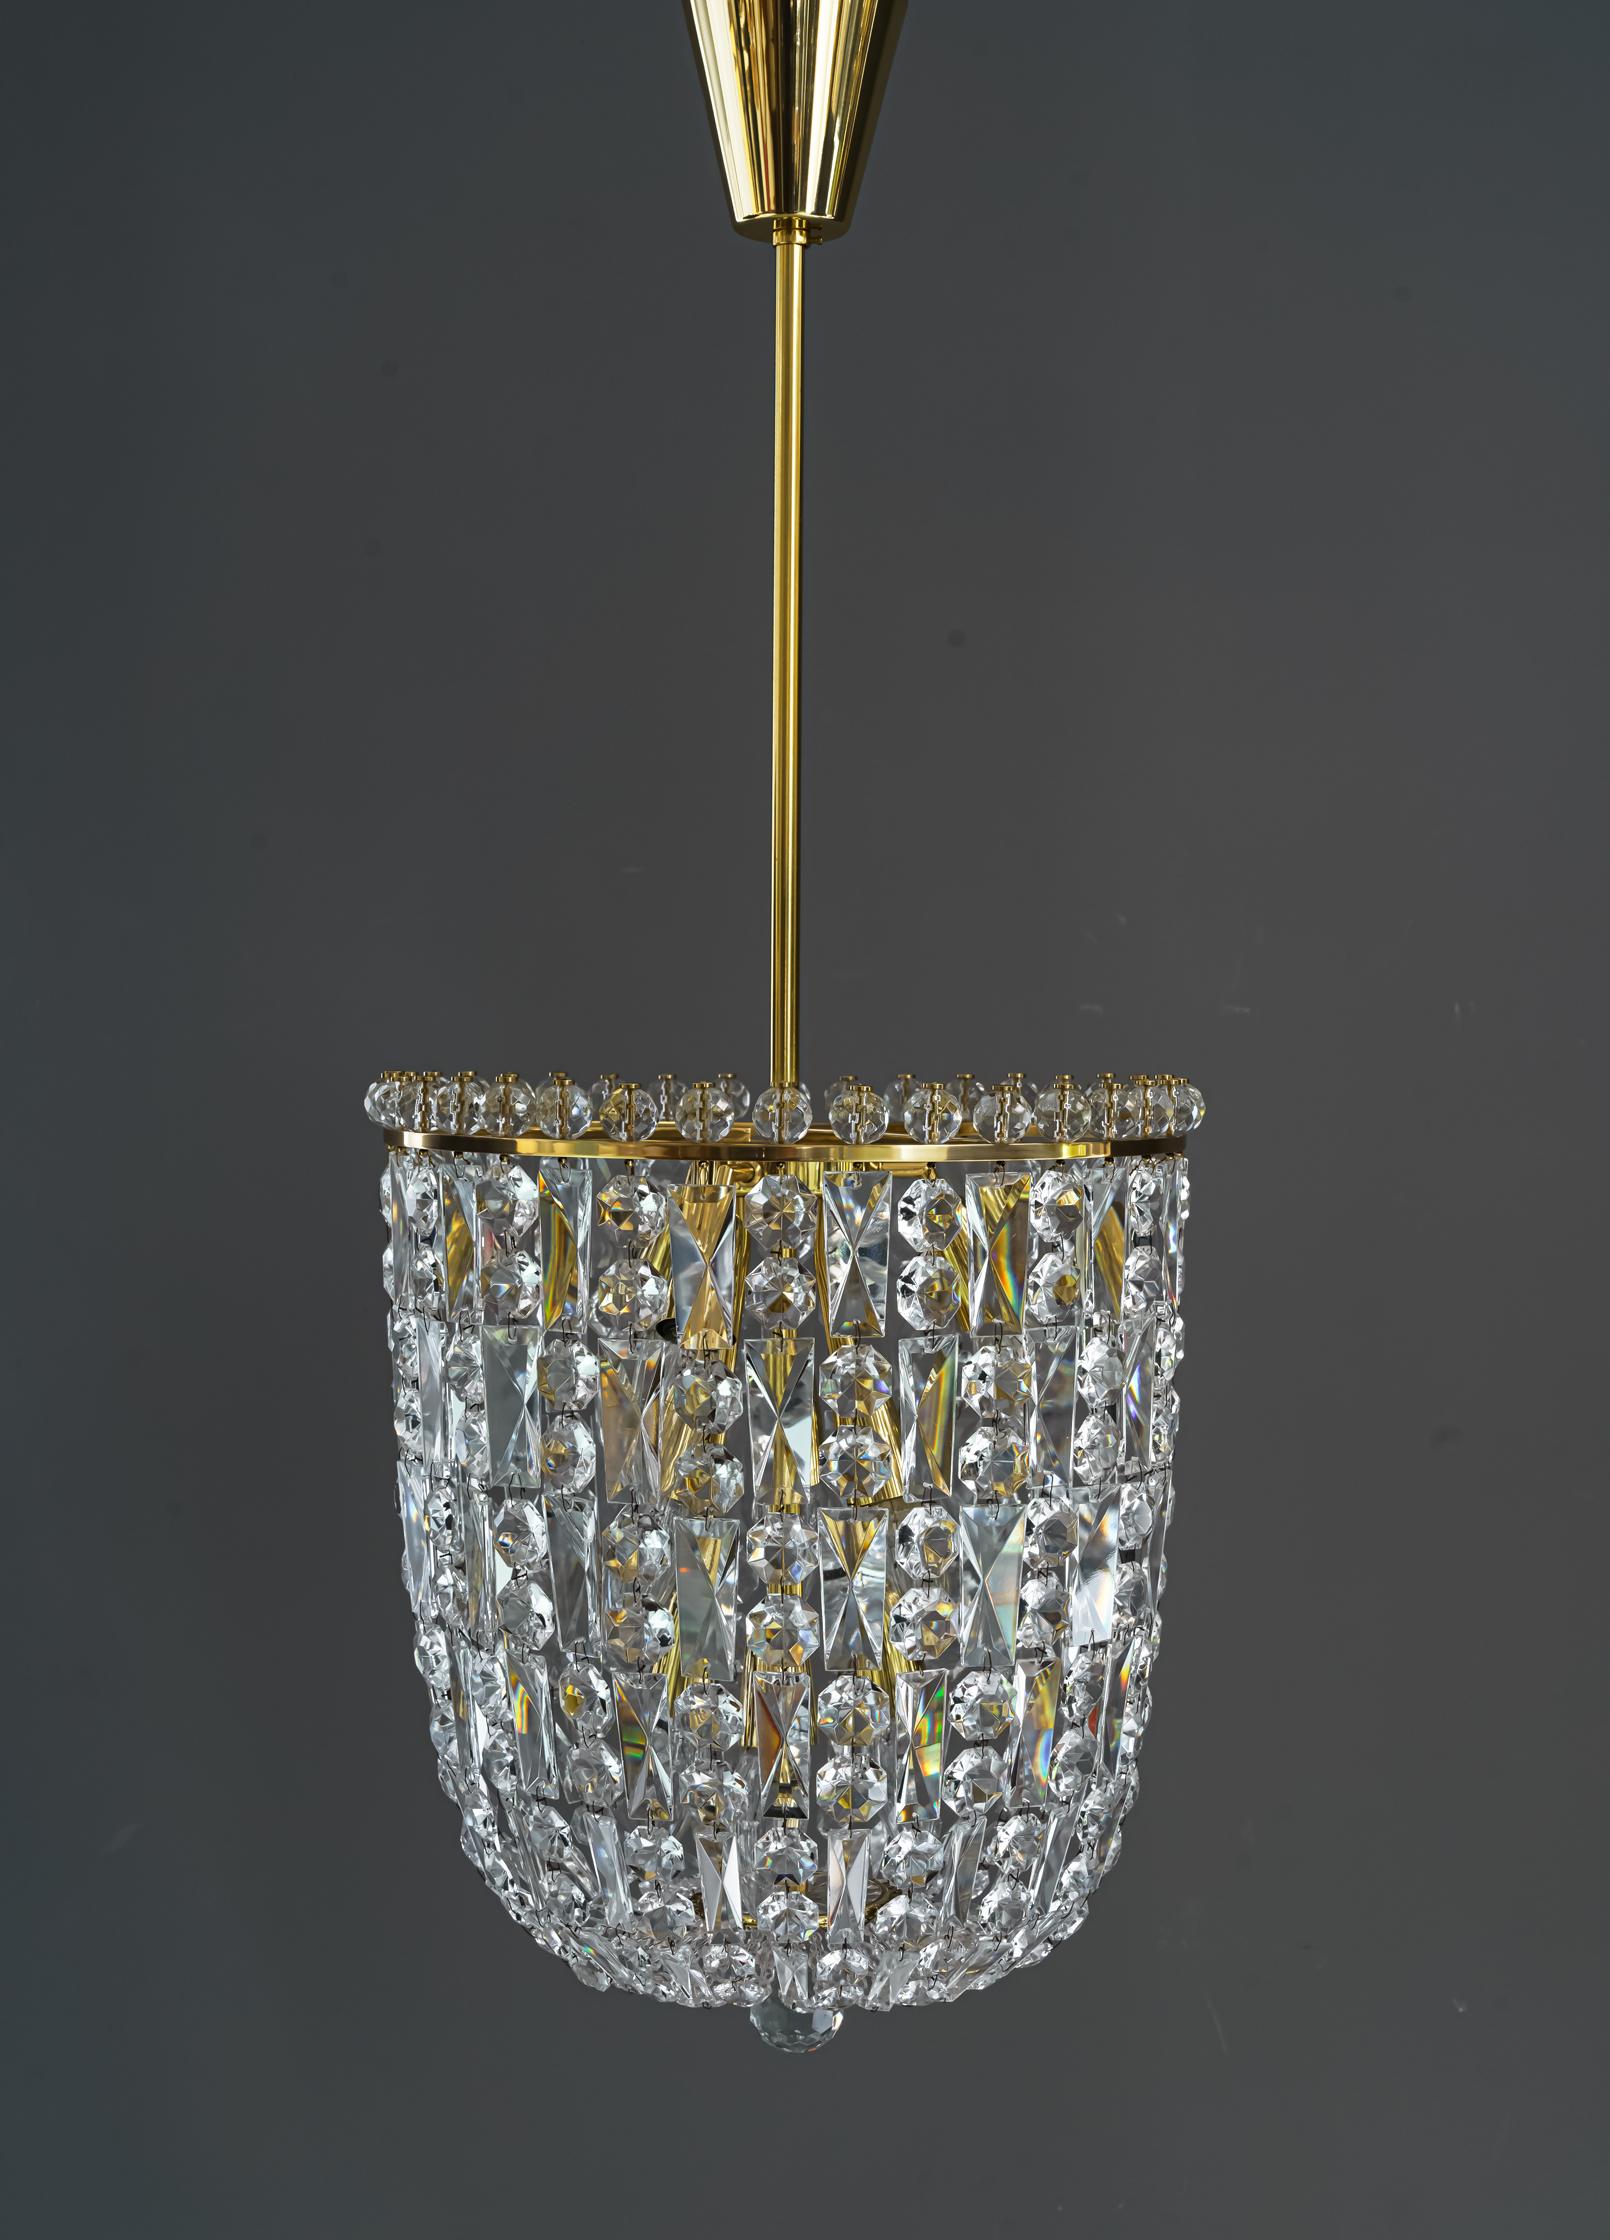 Big Bakalowits crystal chandelier vienna around 1950s
Brass polished and stove enamelled
6 bulbs.